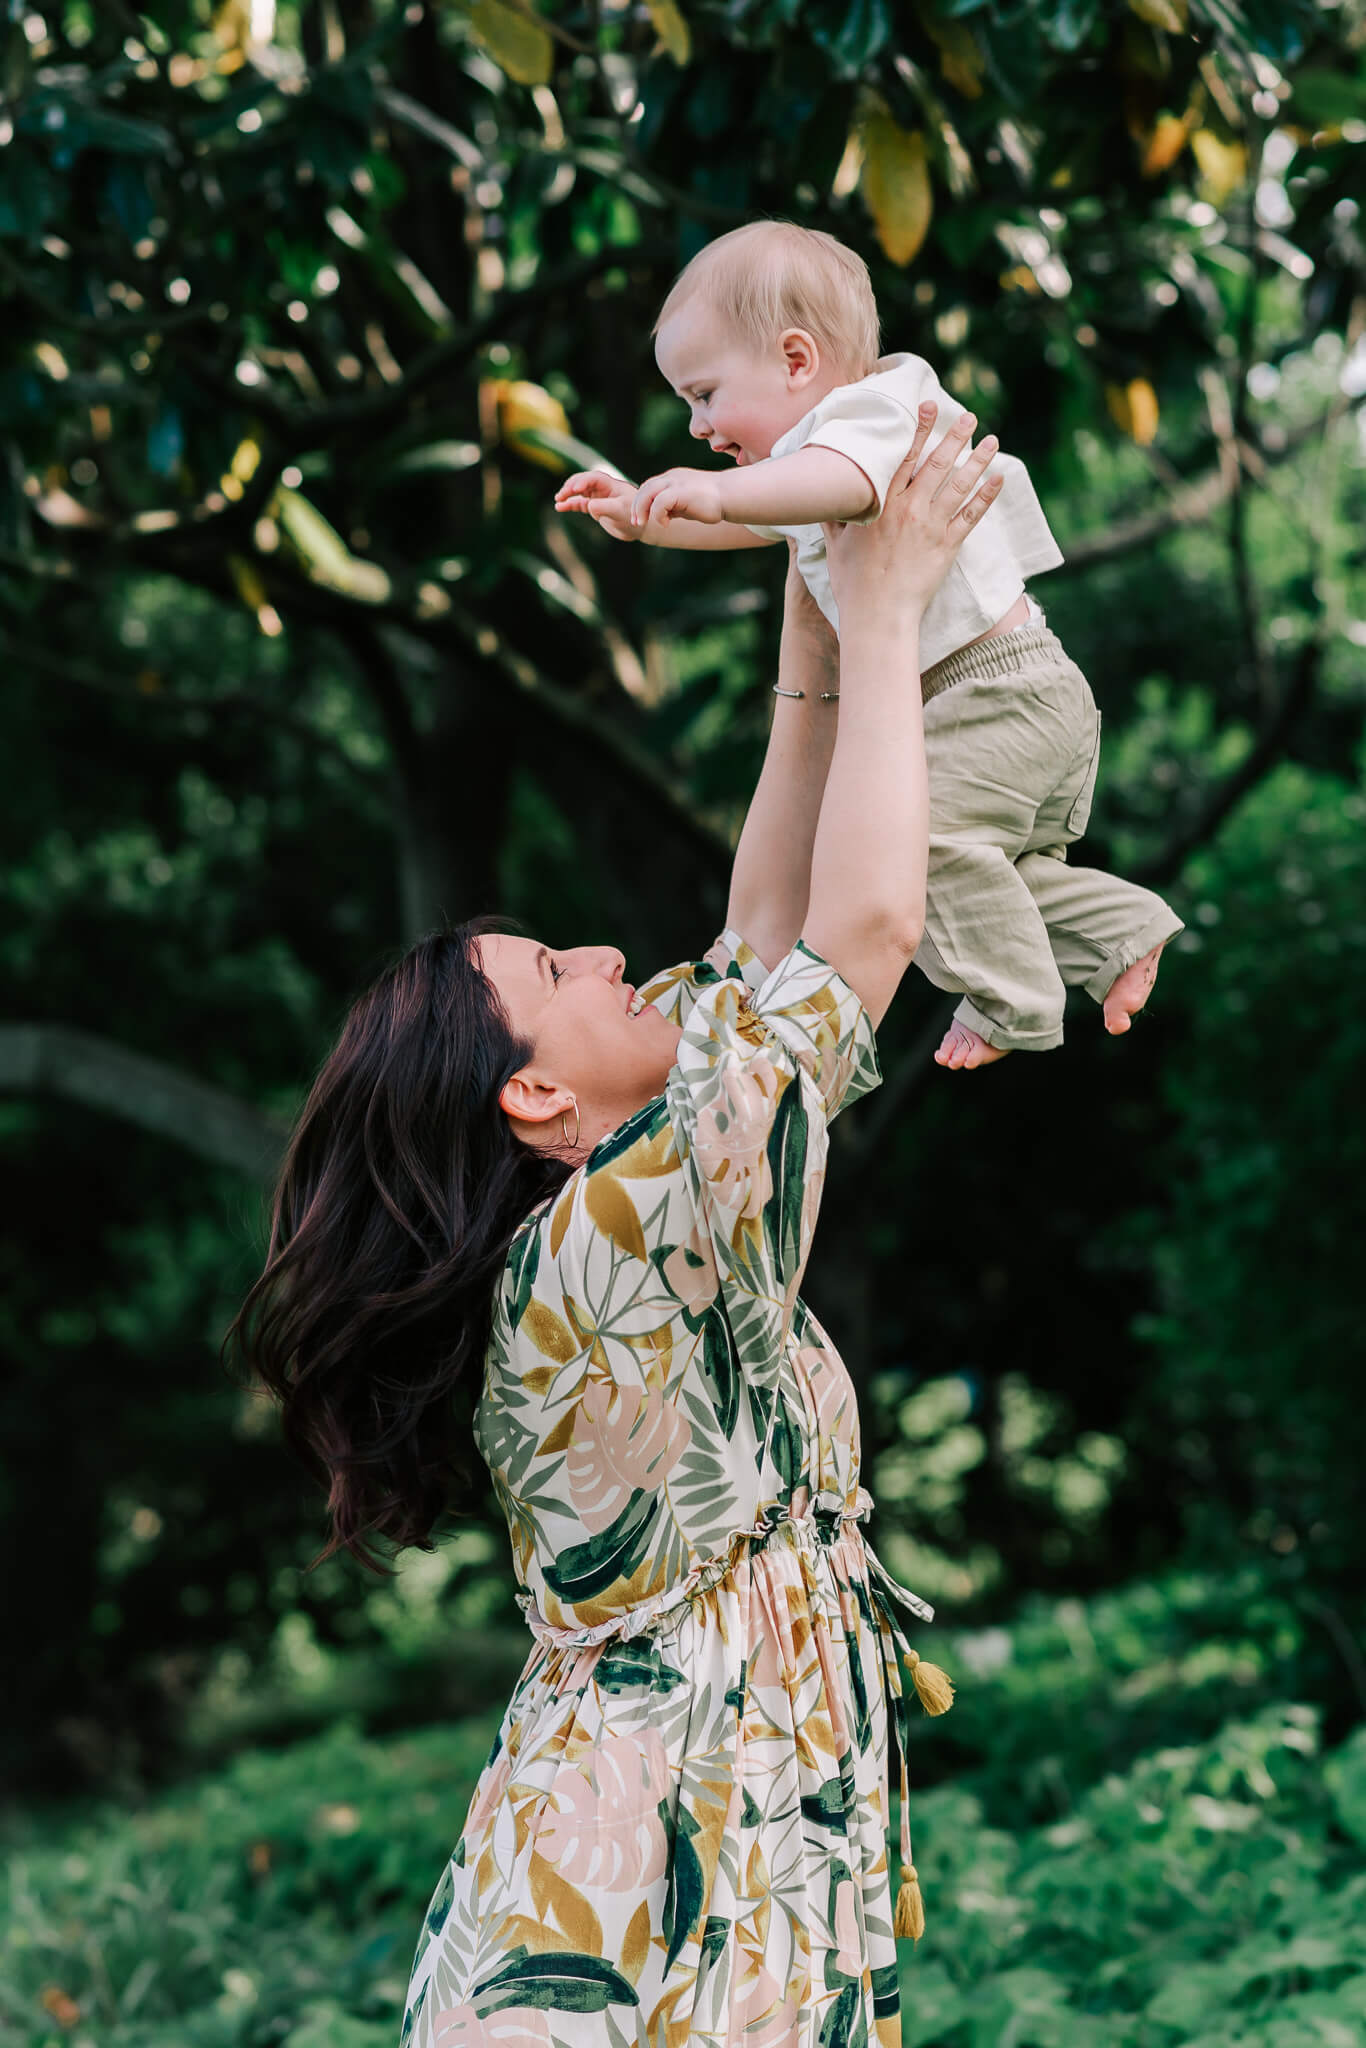 A mother in a tropical print dress lifts her young child in the air to play in a garden happy parents happy babies